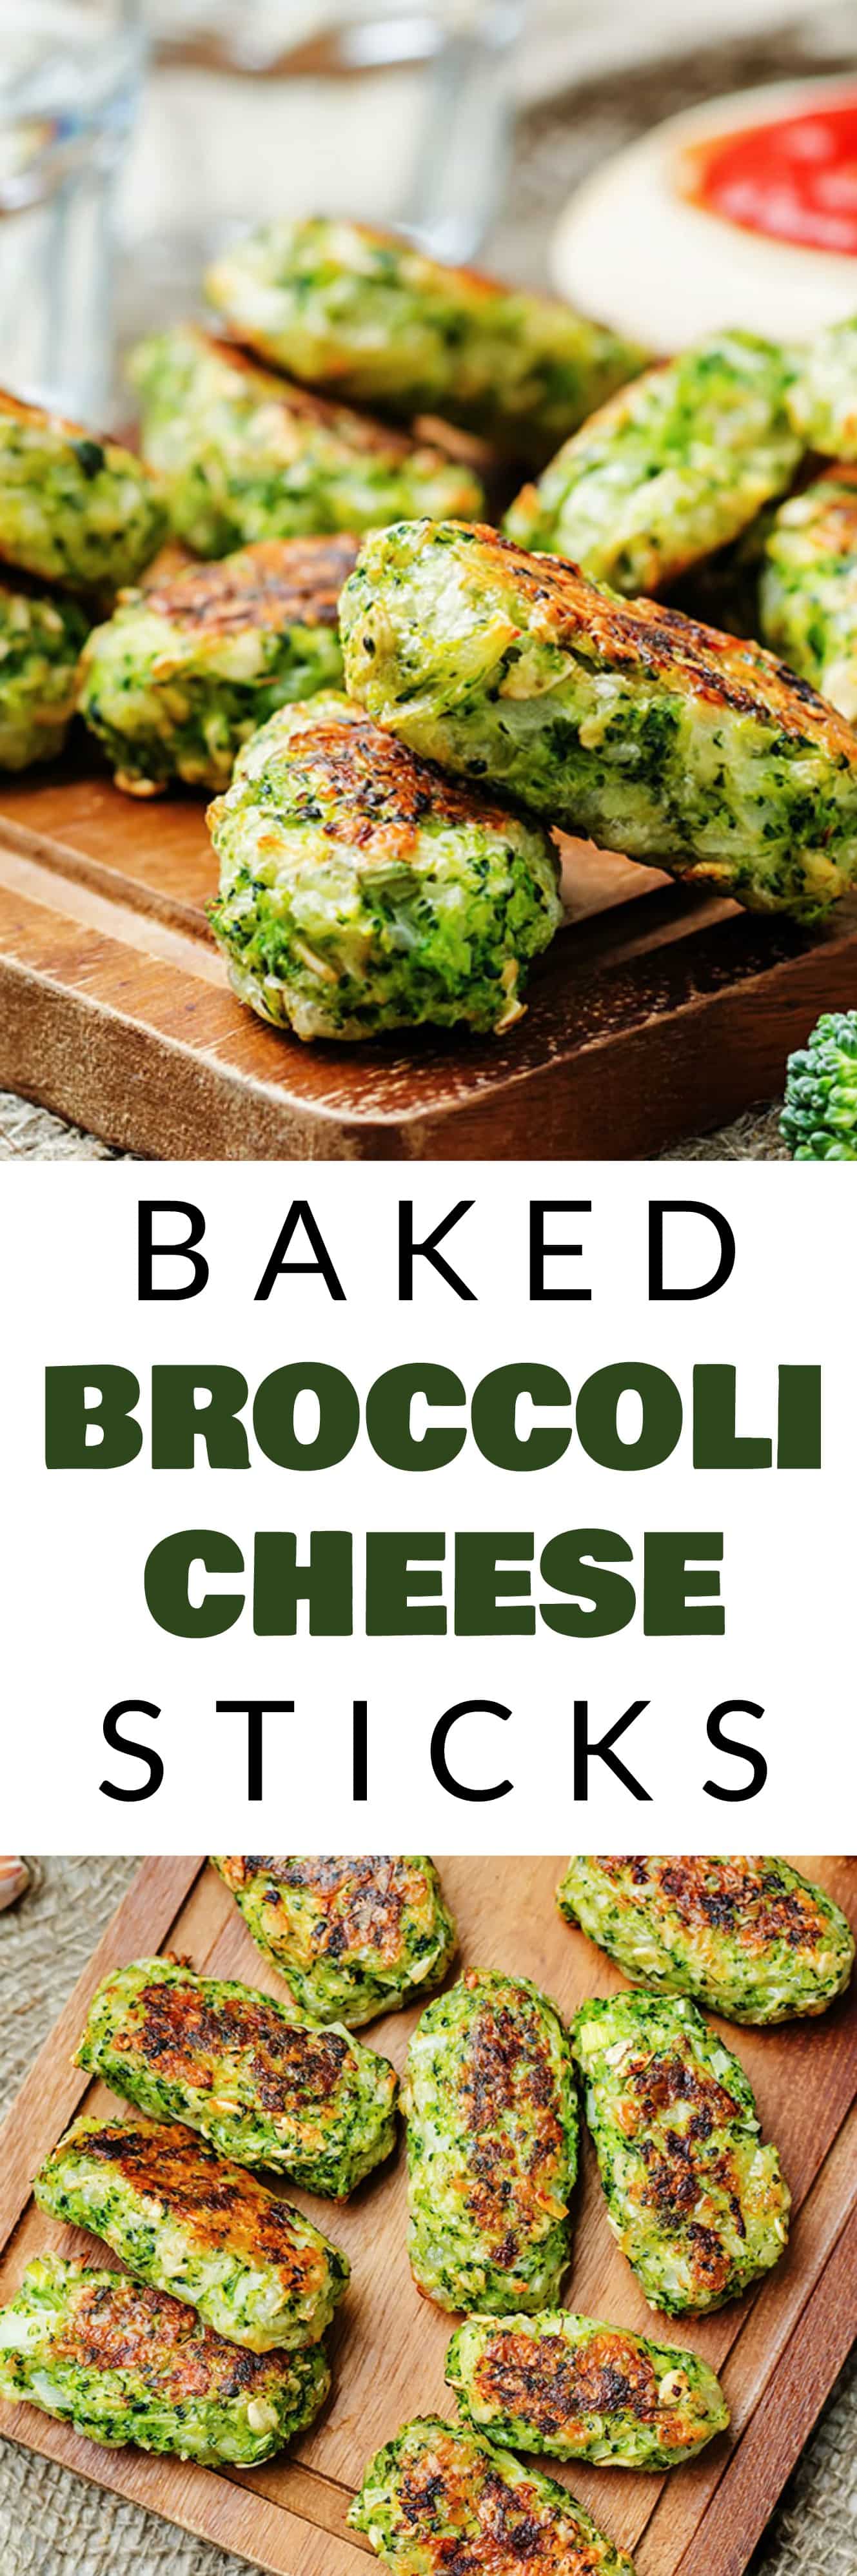 Baked Broccoli and Cheese Sticks recipe is easy to make and only uses 5 ingredients. This delicious snack food is perfect to serve as a party appetizer or snack!  Your kids are going to love these easy cheesy broccoli bites!